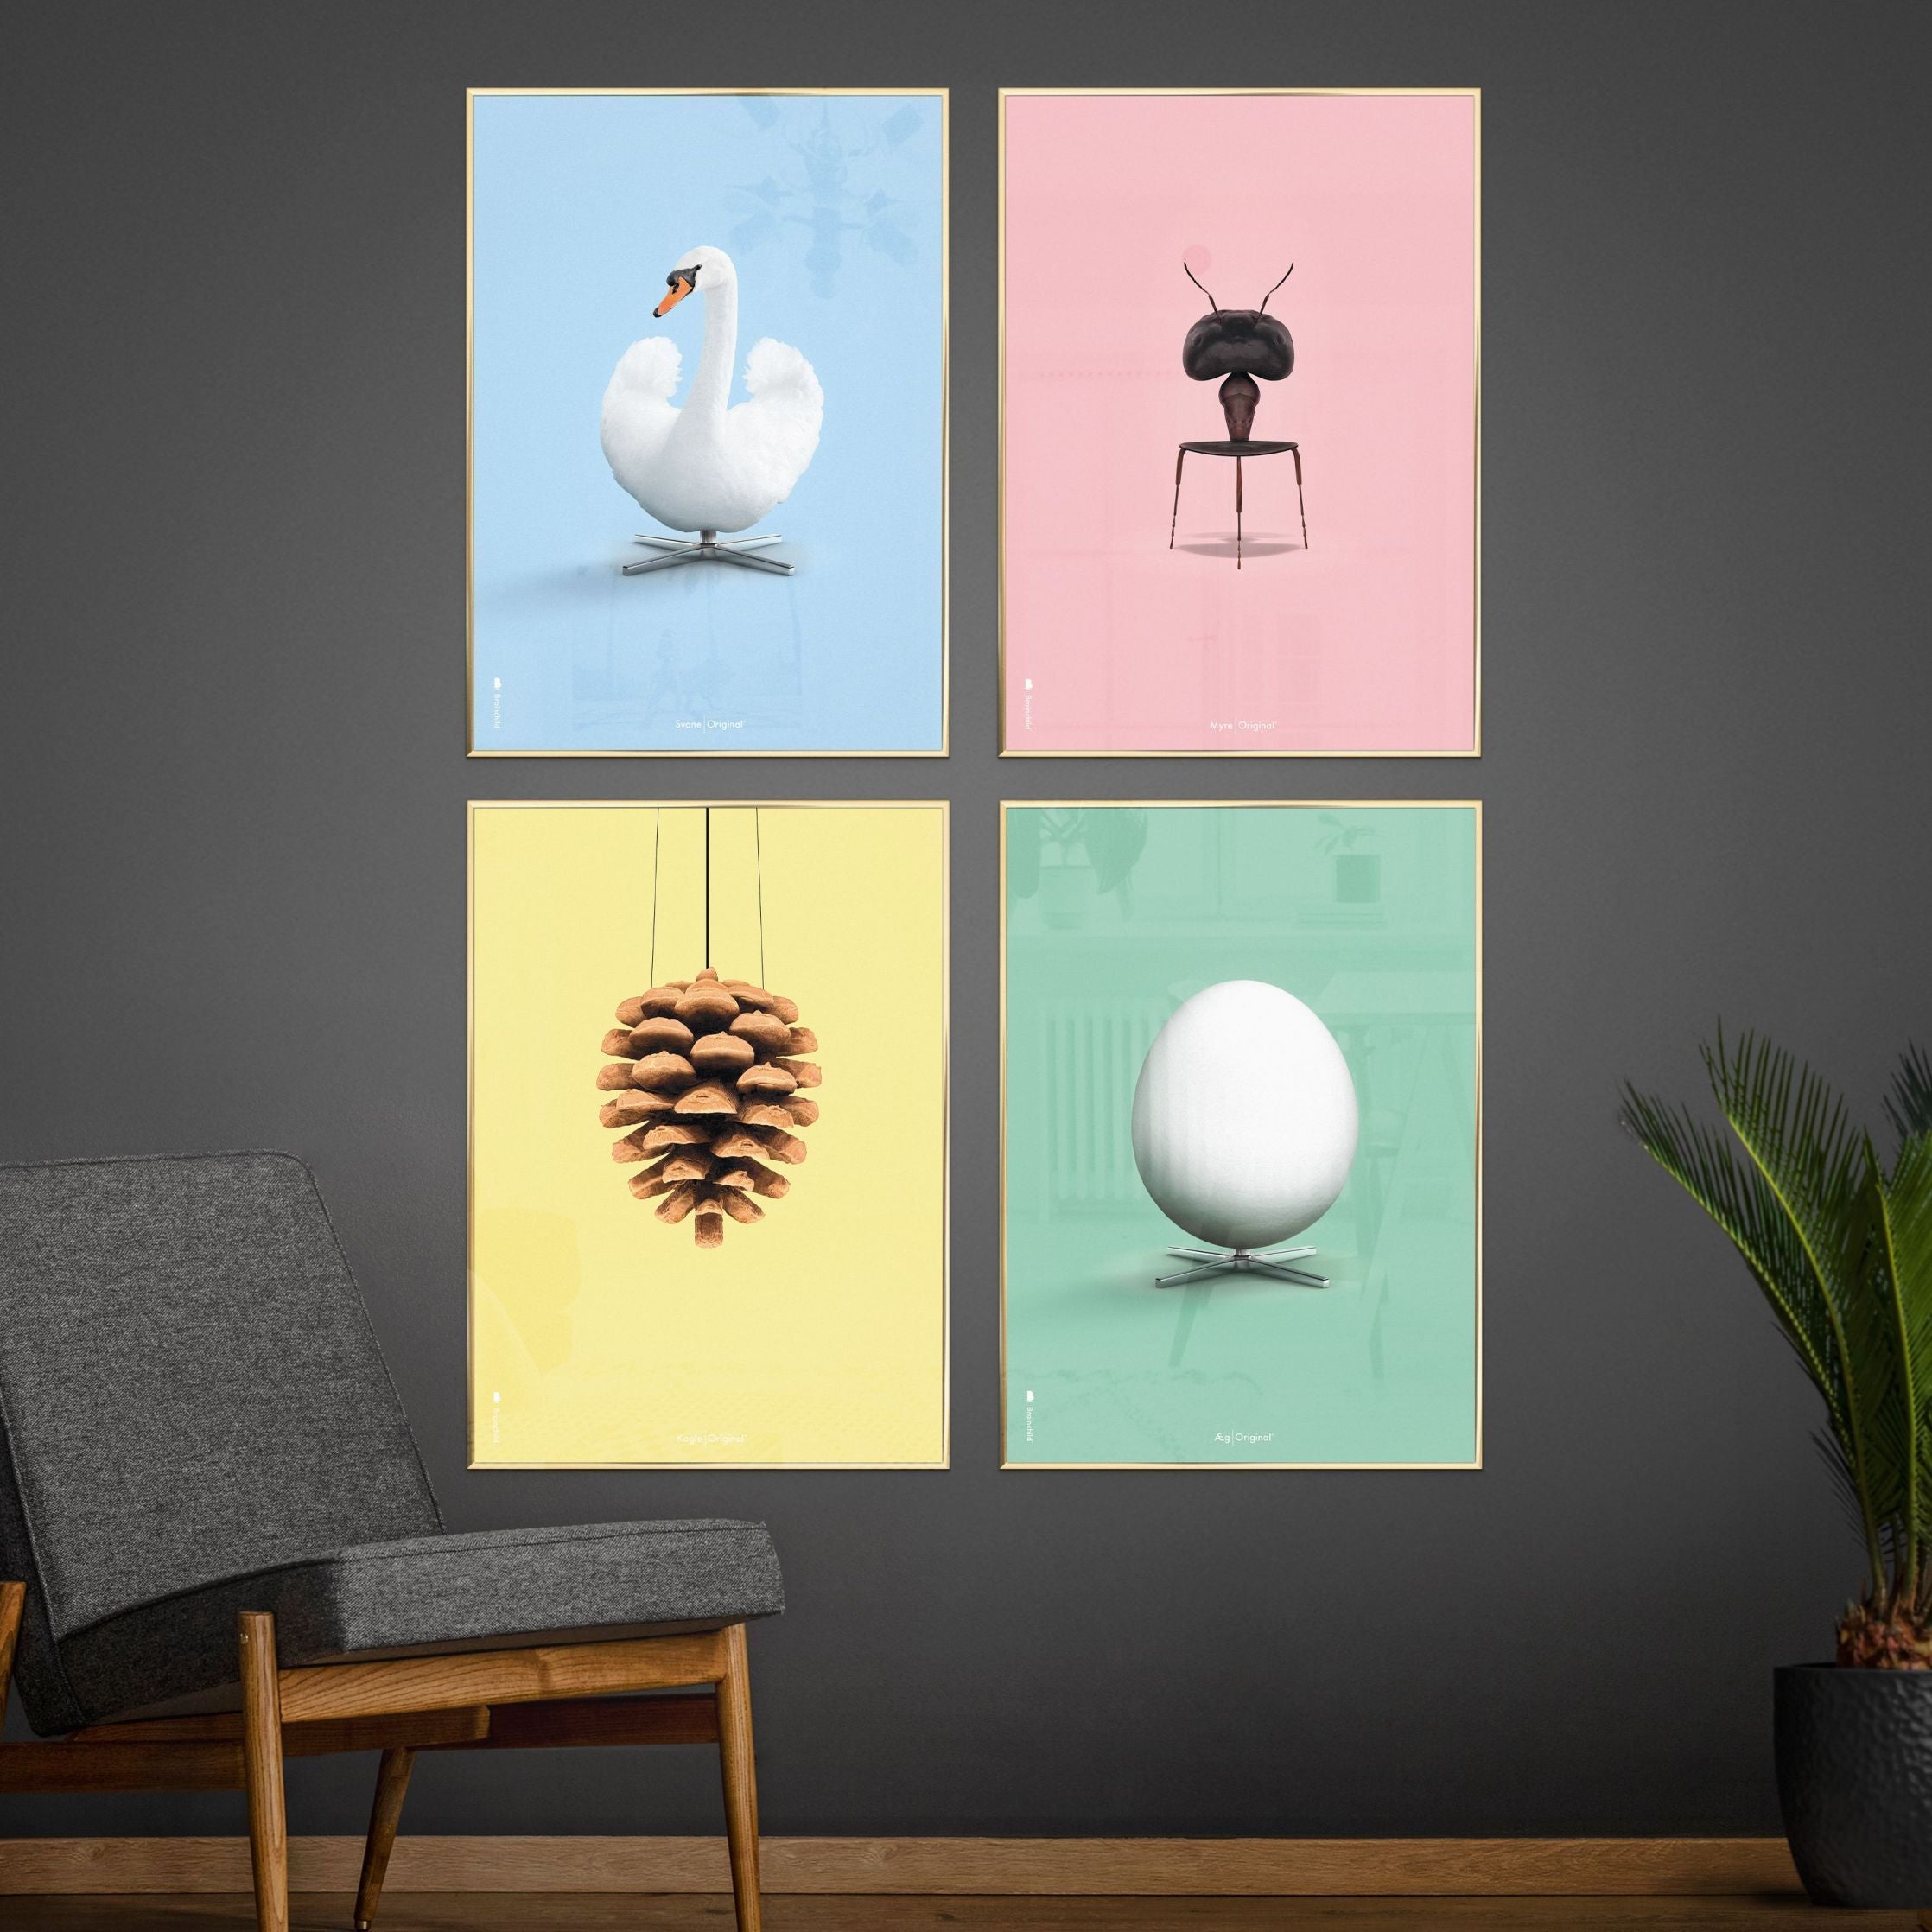 Brainchild Swan Classic Poster, Frame In Black Lacquered Wood A5, Light Blue Background